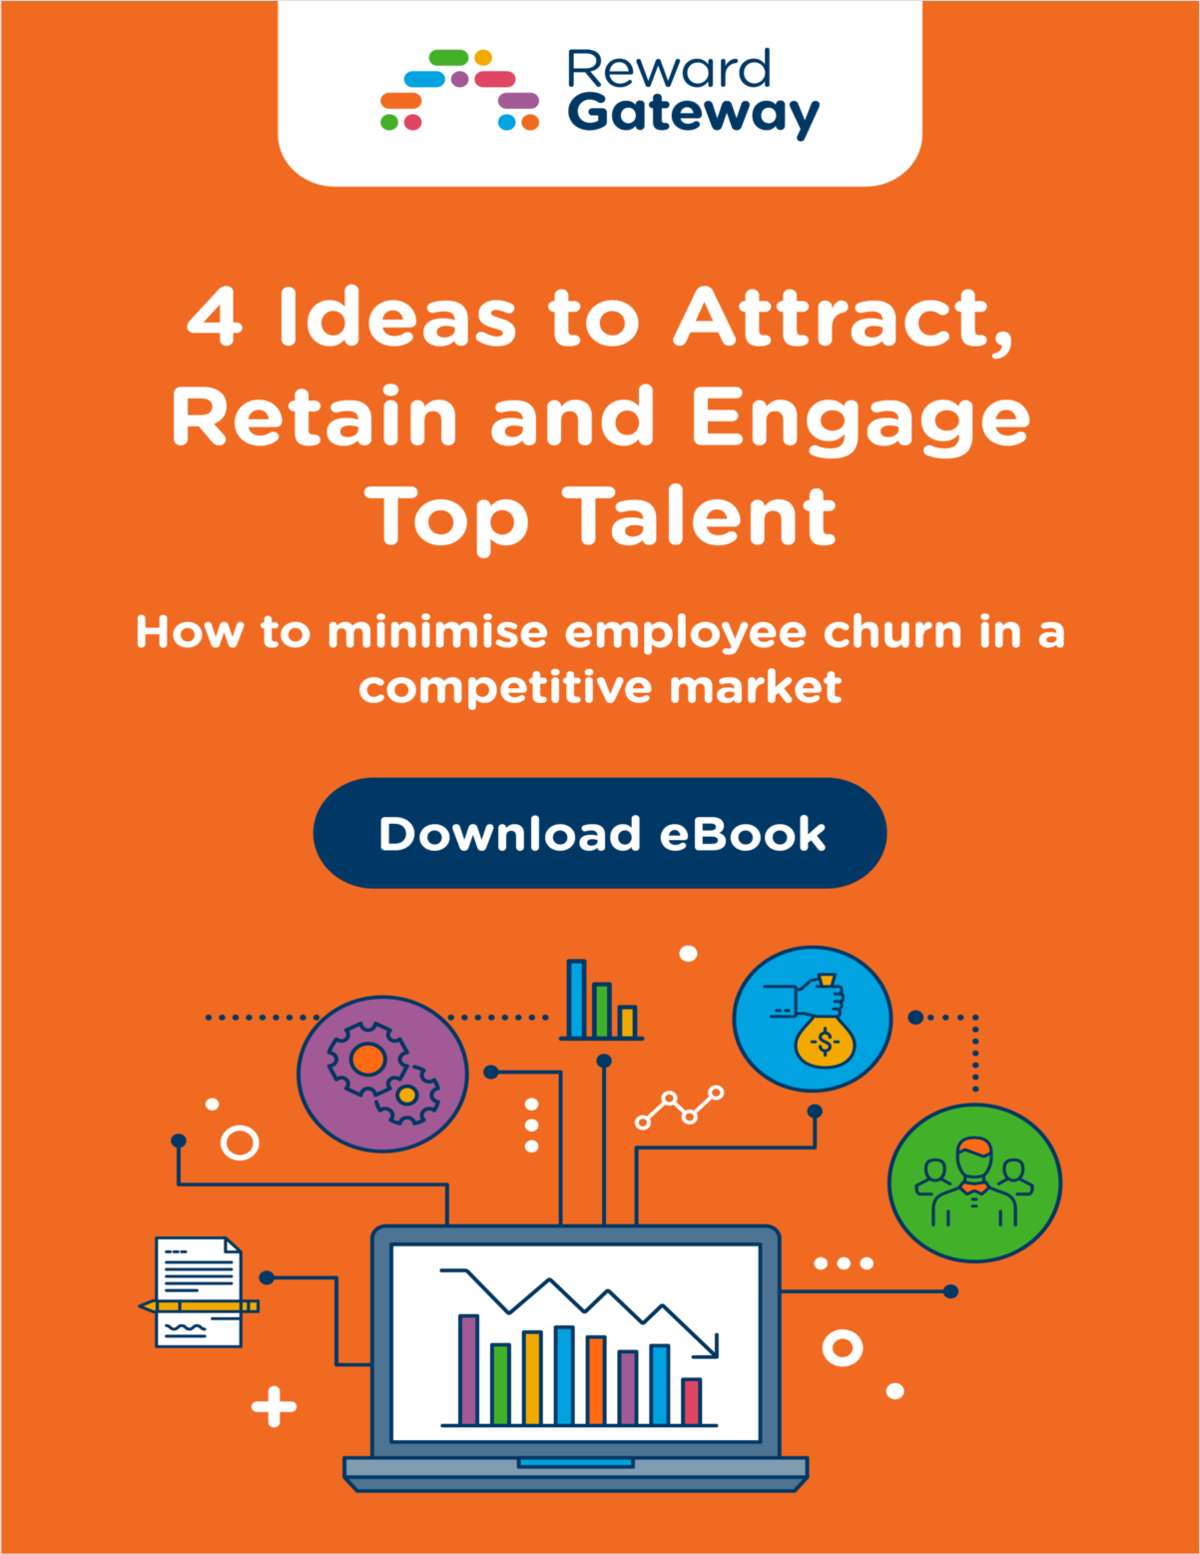 4 Ideas to Attract, Engage and Retain Top Talent